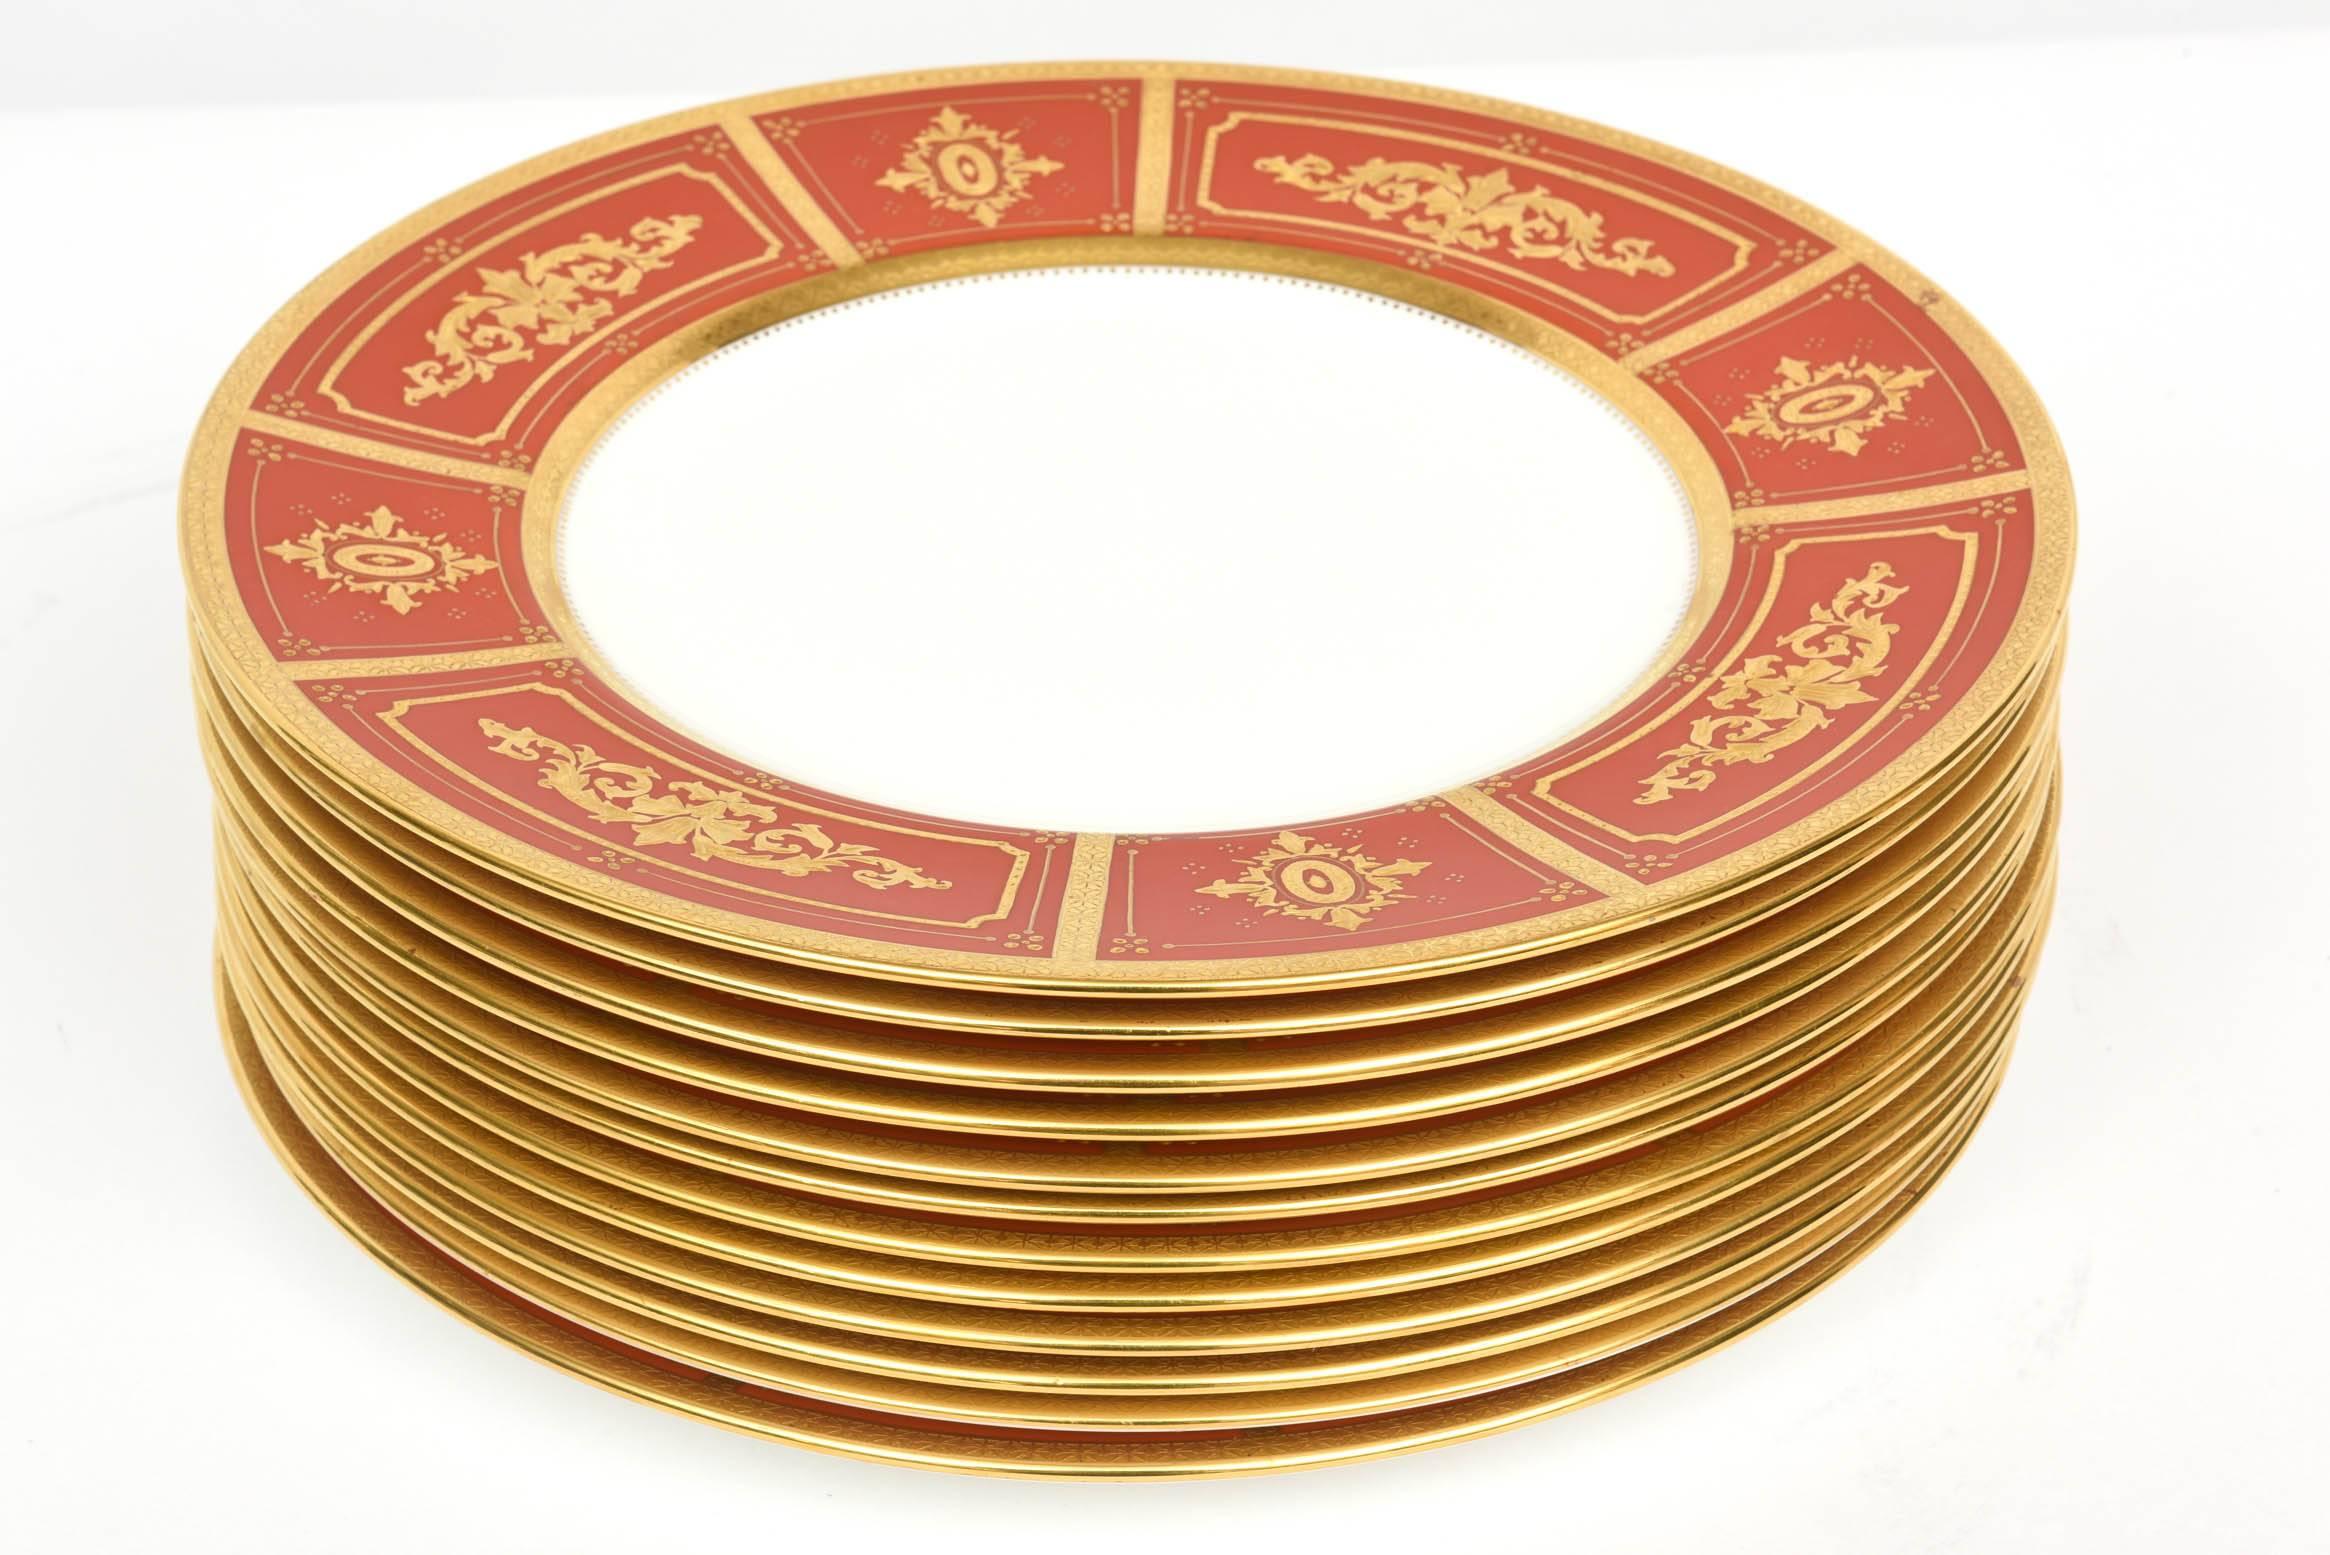 Hand-Crafted 12 Minton for Tiffany Antique Orange Raised Gilt Encrusted Dinner Plates